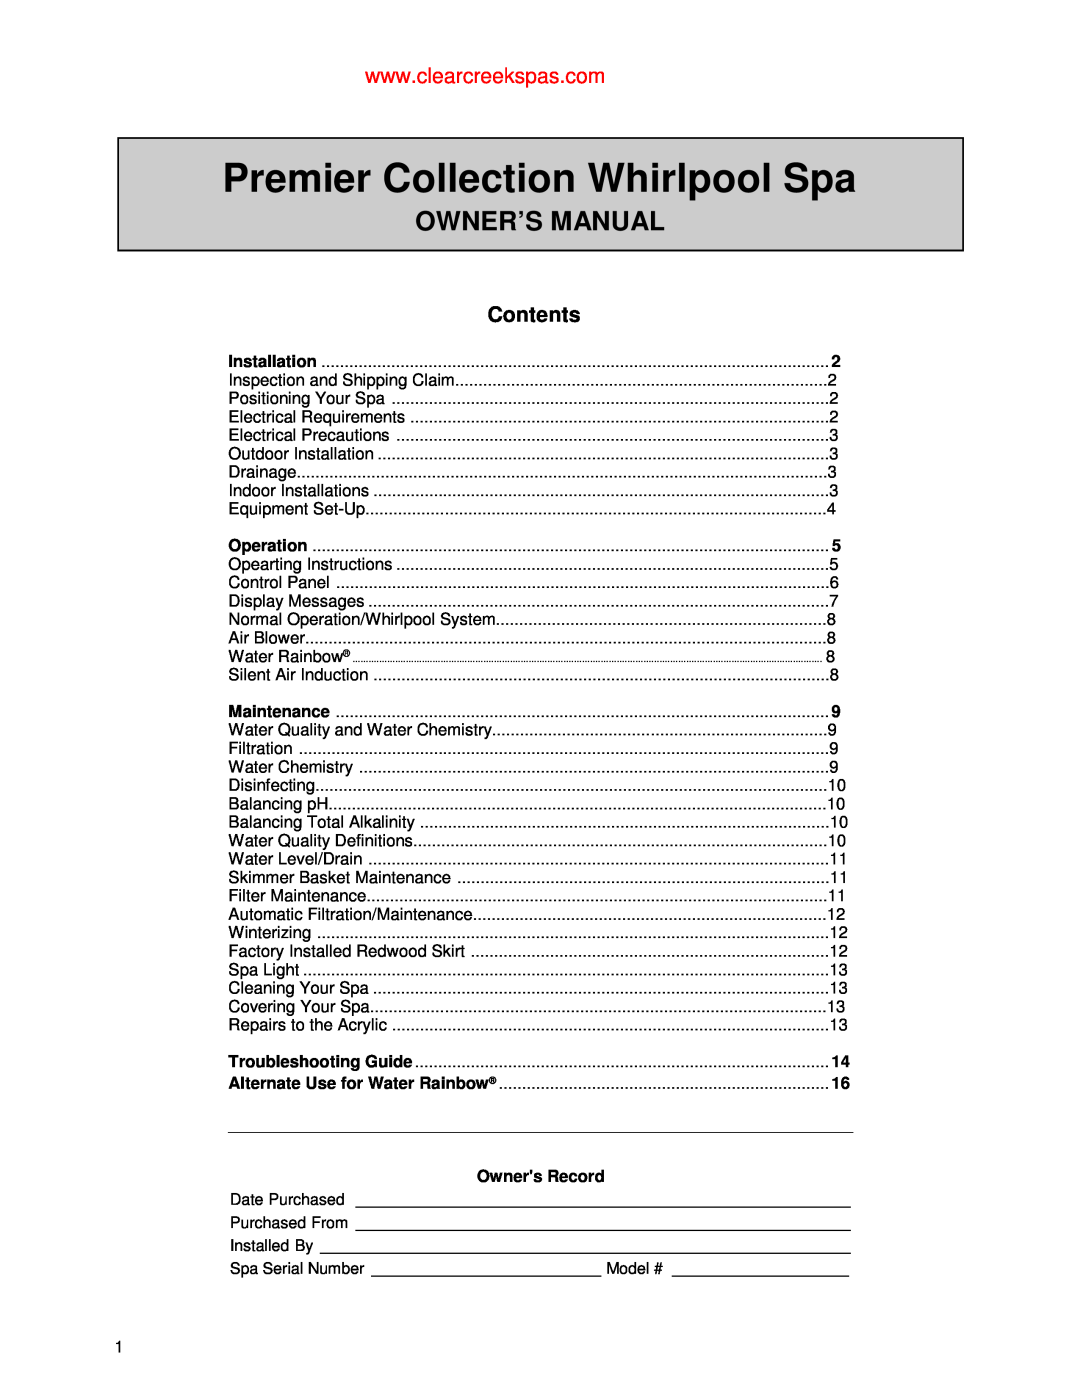 Jacuzzi owner manual Premier Collection Whirlpool Spa, Owner’S Manual, Owners Record, Contents 